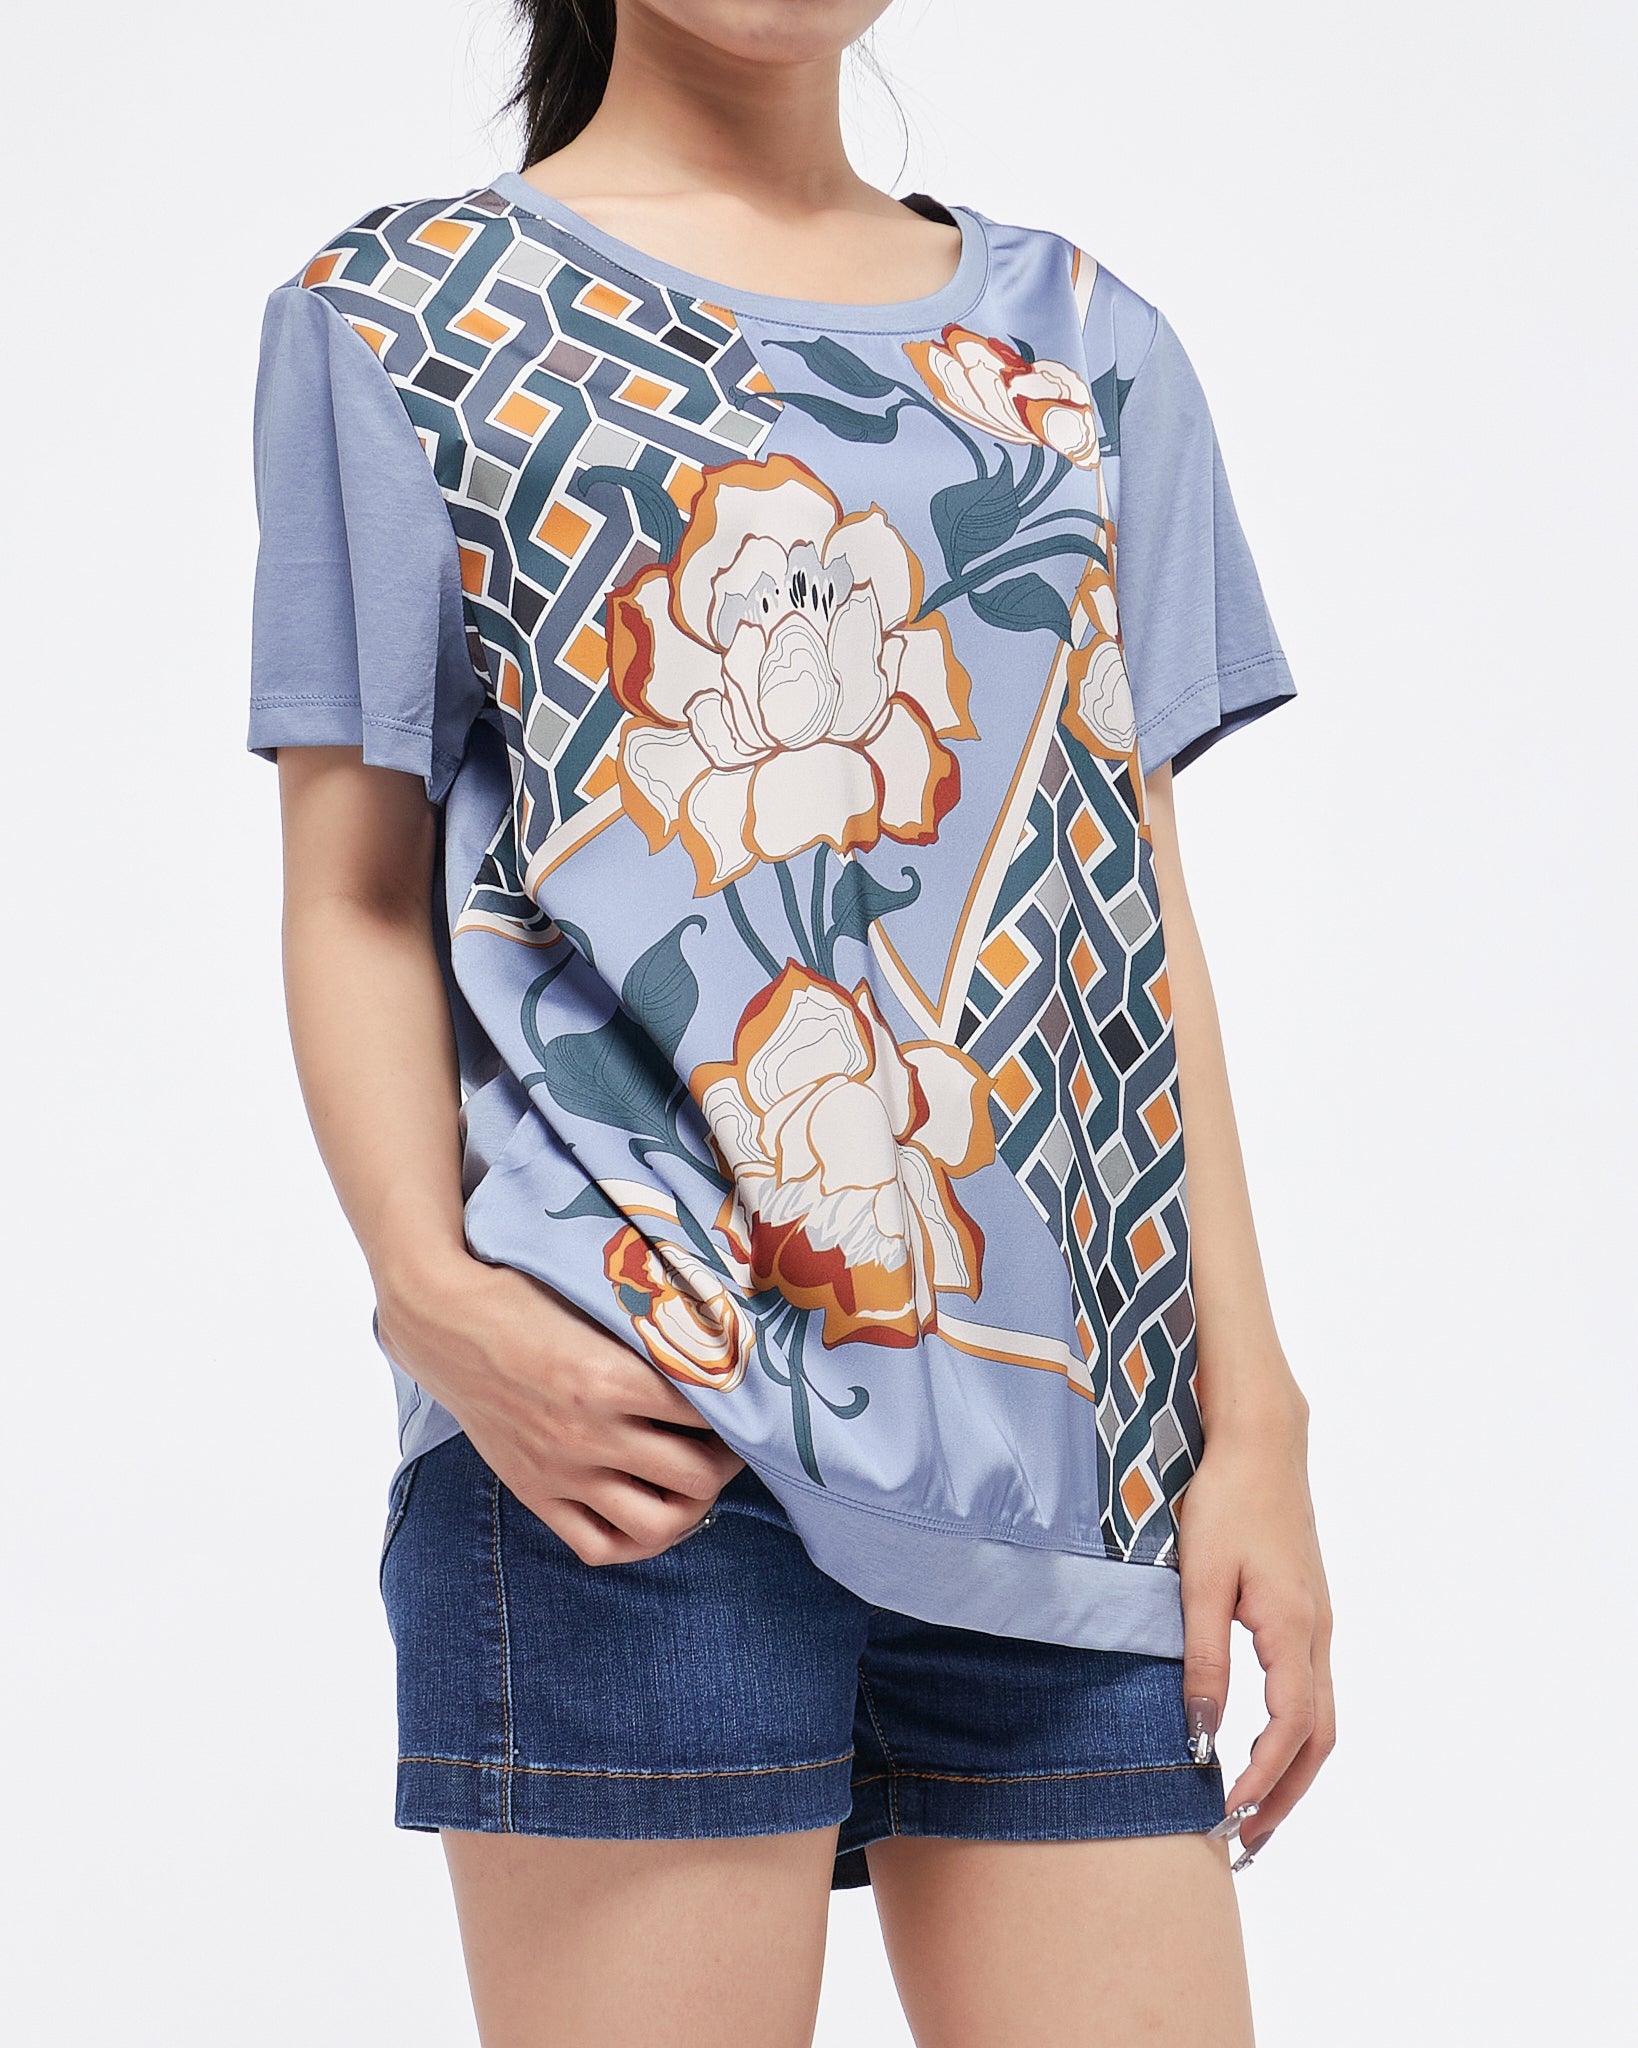 MOI OUTFIT-Floral Over Printed Lady T-Shirt 17.90